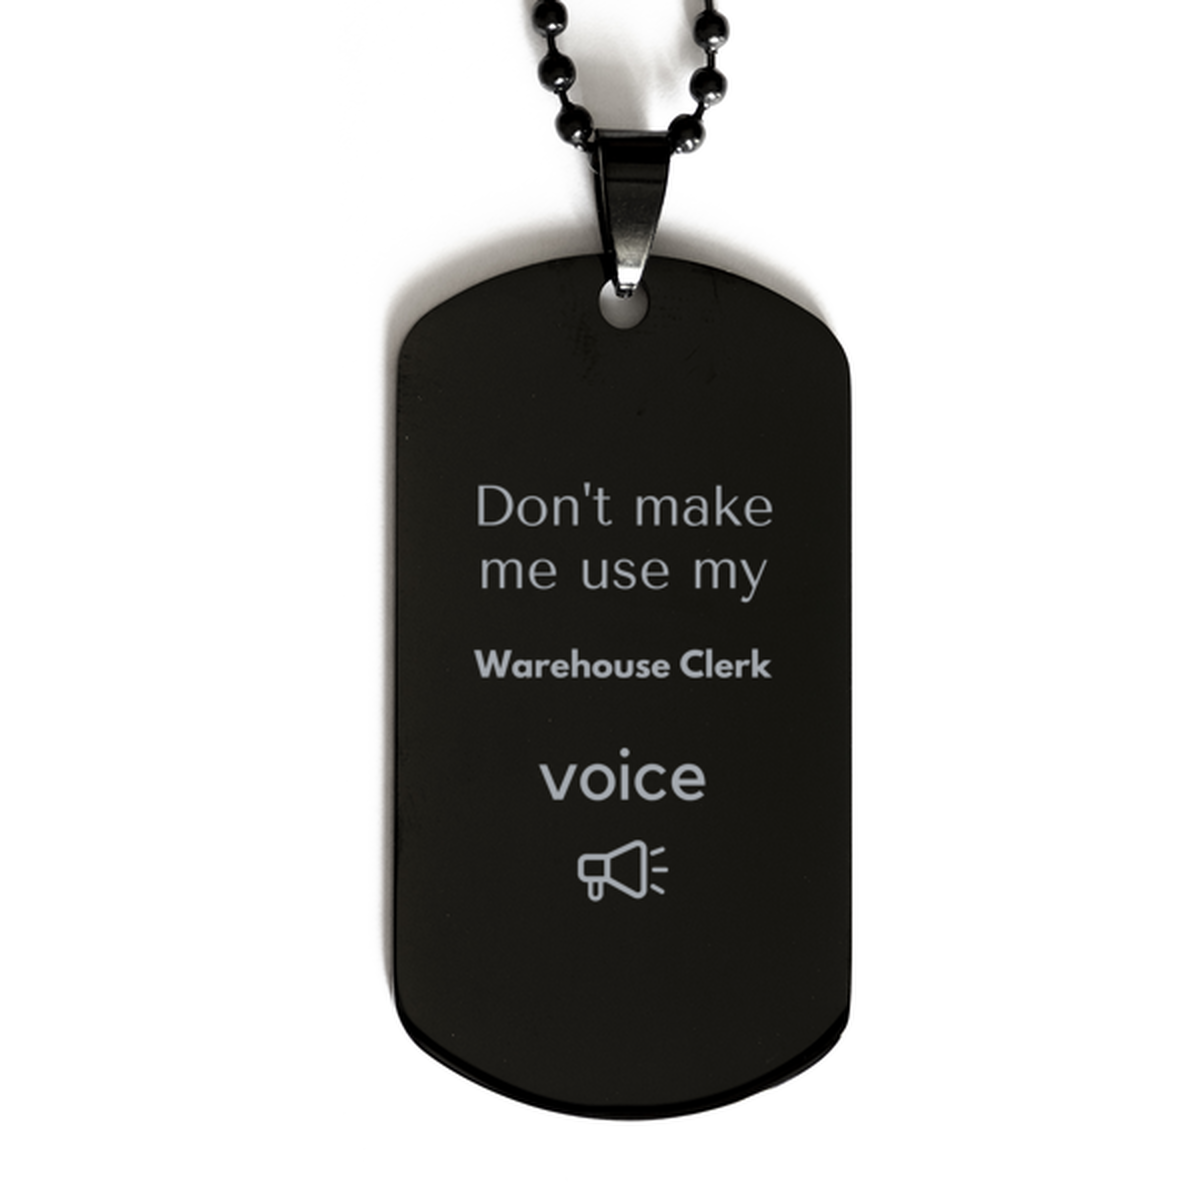 Don't make me use my Warehouse Clerk voice, Sarcasm Warehouse Clerk Gifts, Christmas Warehouse Clerk Black Dog Tag Birthday Unique Gifts For Warehouse Clerk Coworkers, Men, Women, Colleague, Friends